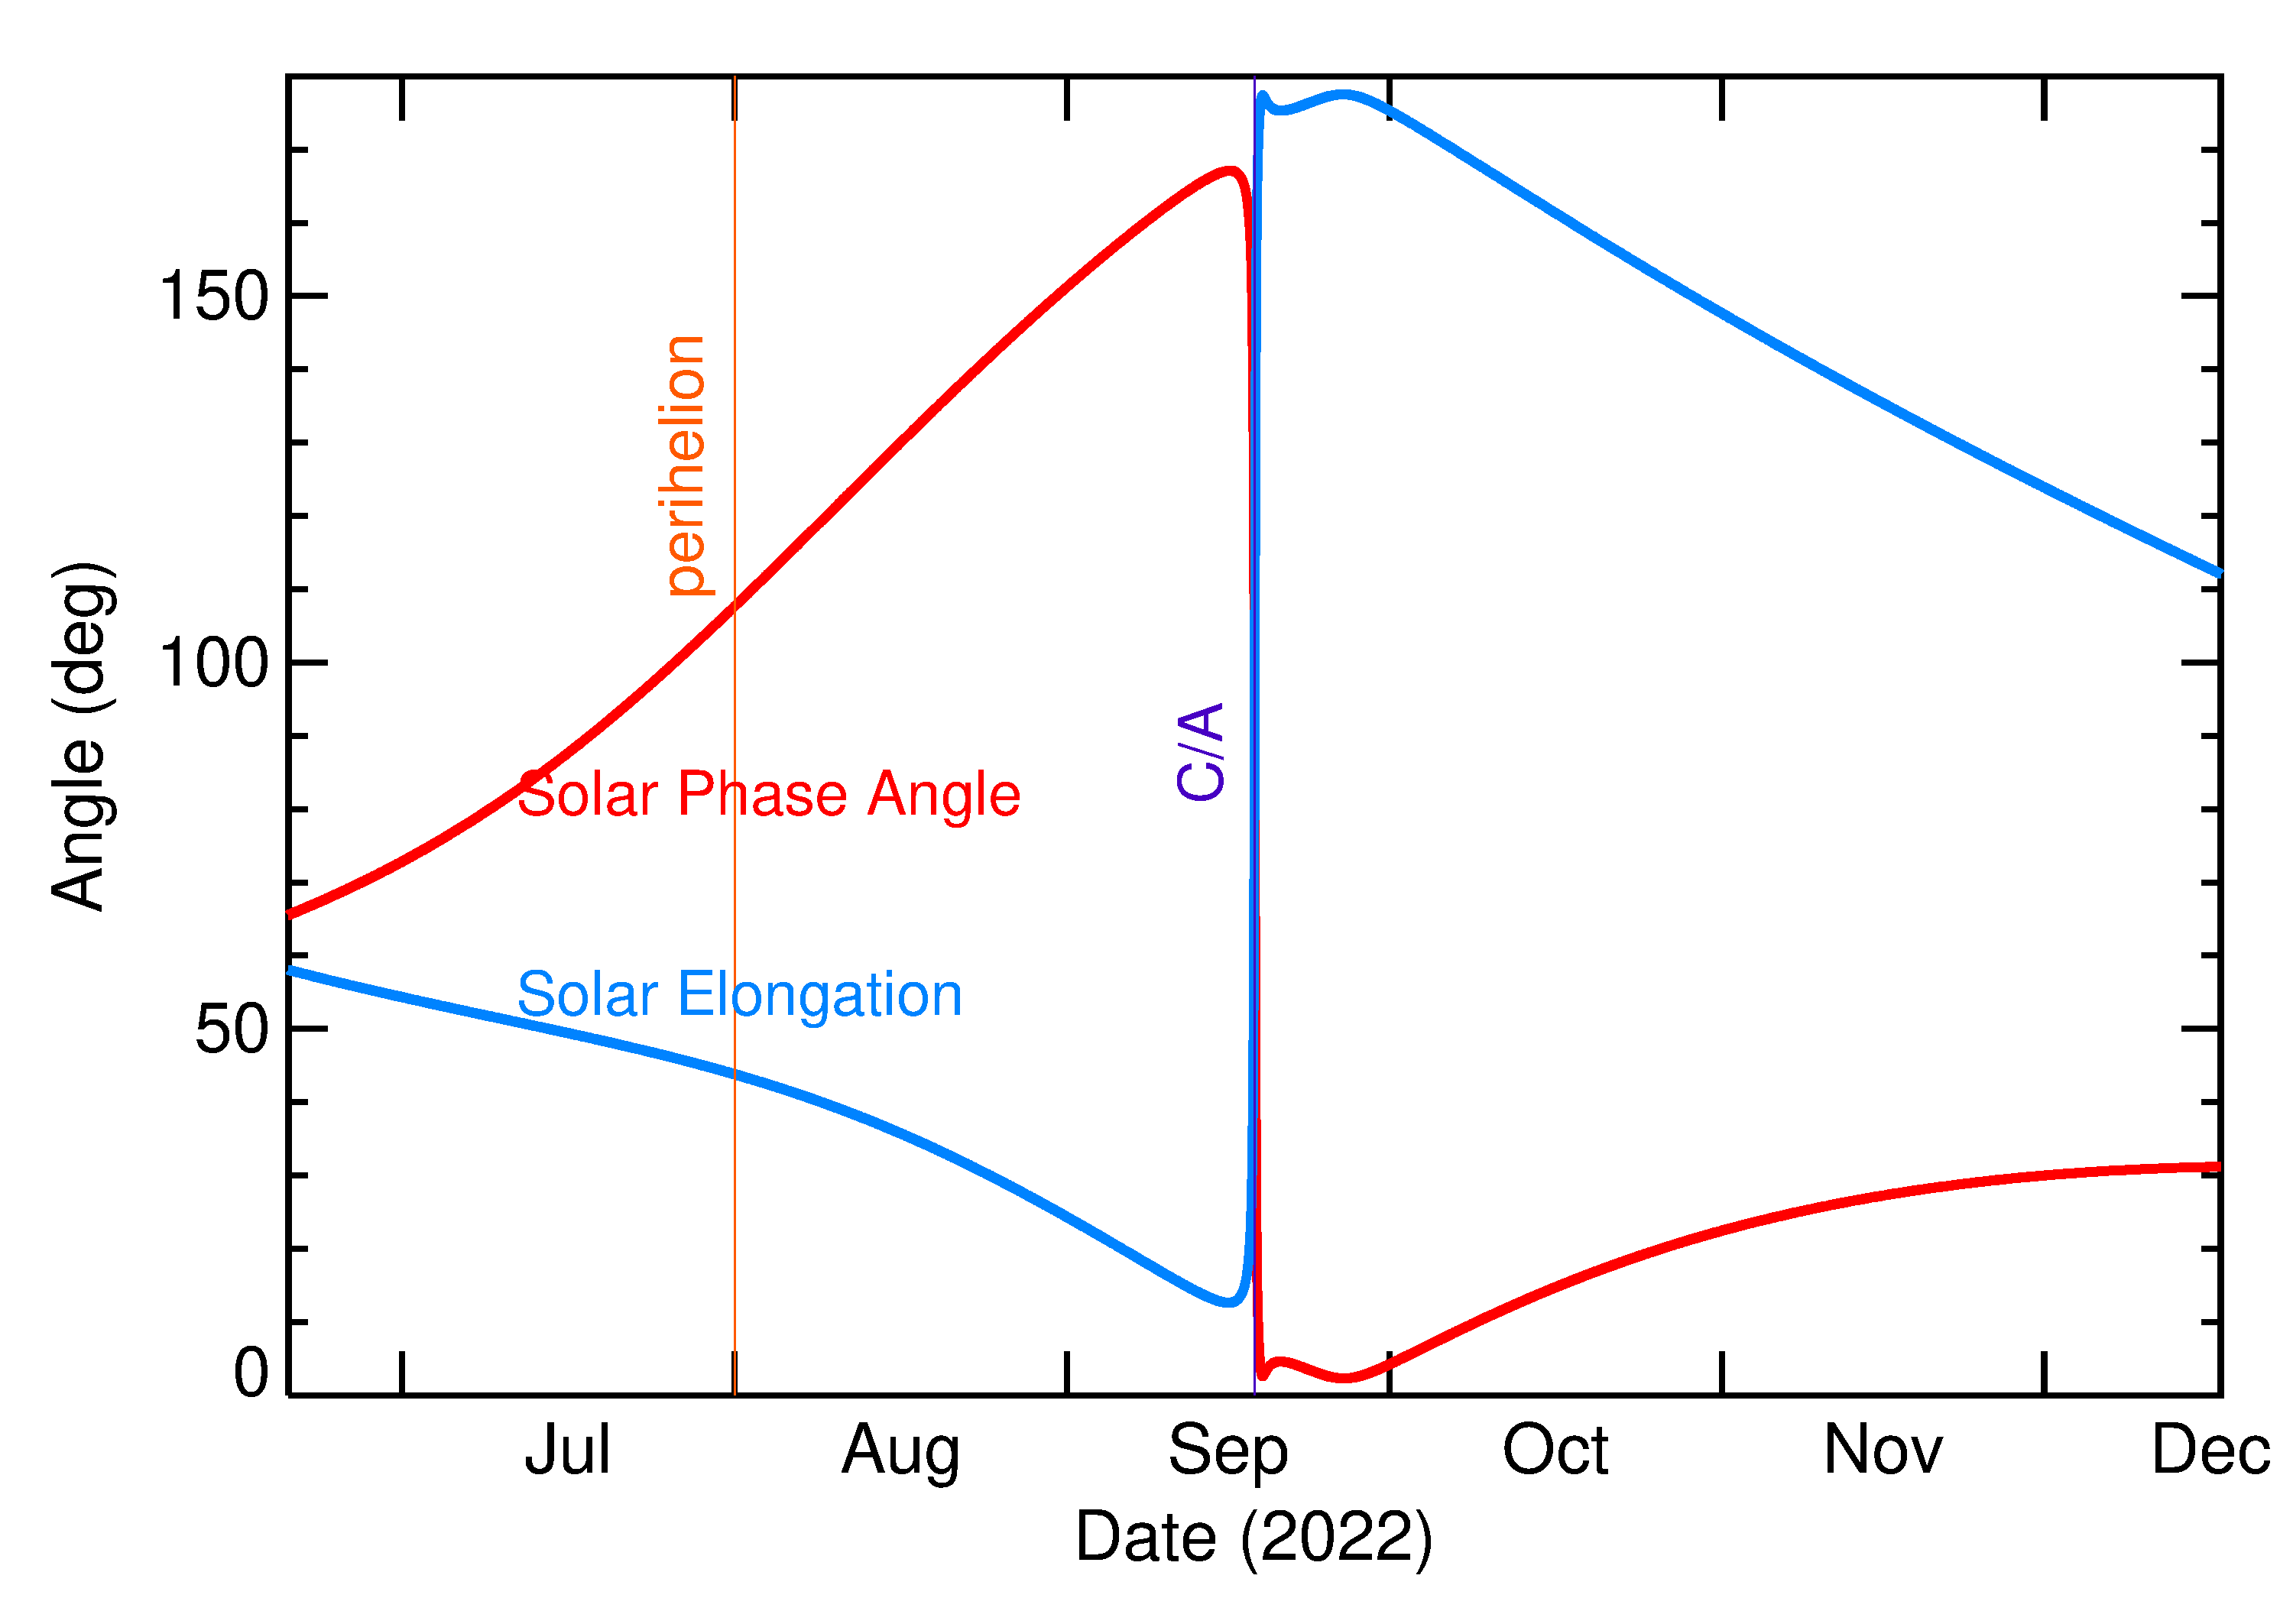 Solar Elongation and Solar Phase Angle of 2022 SJ3 in the months around closest approach